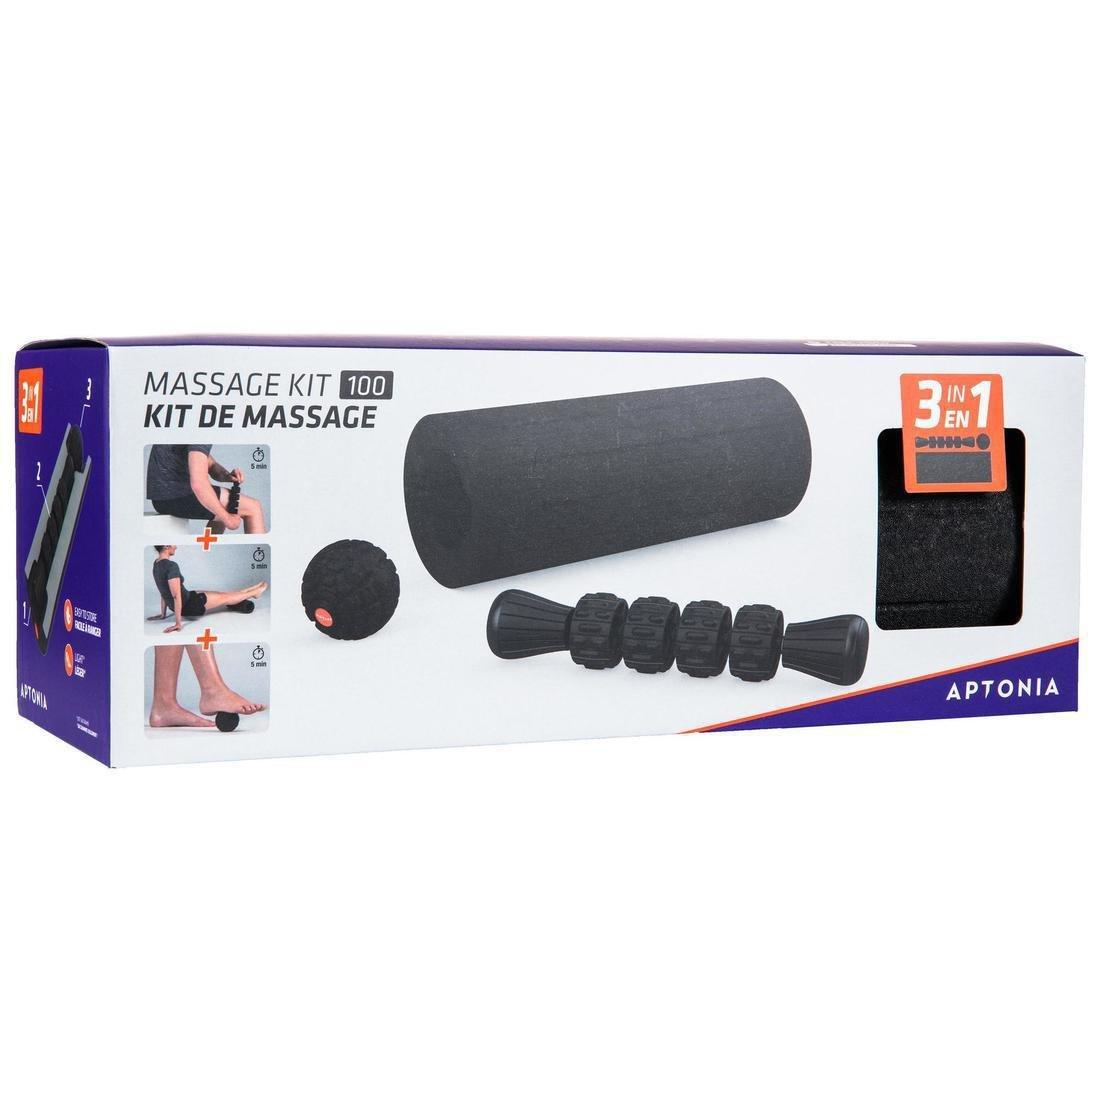 DECATHLON - Discovery 100 3-in-1 Massage Kit: Massage ball, stick and roller, Black